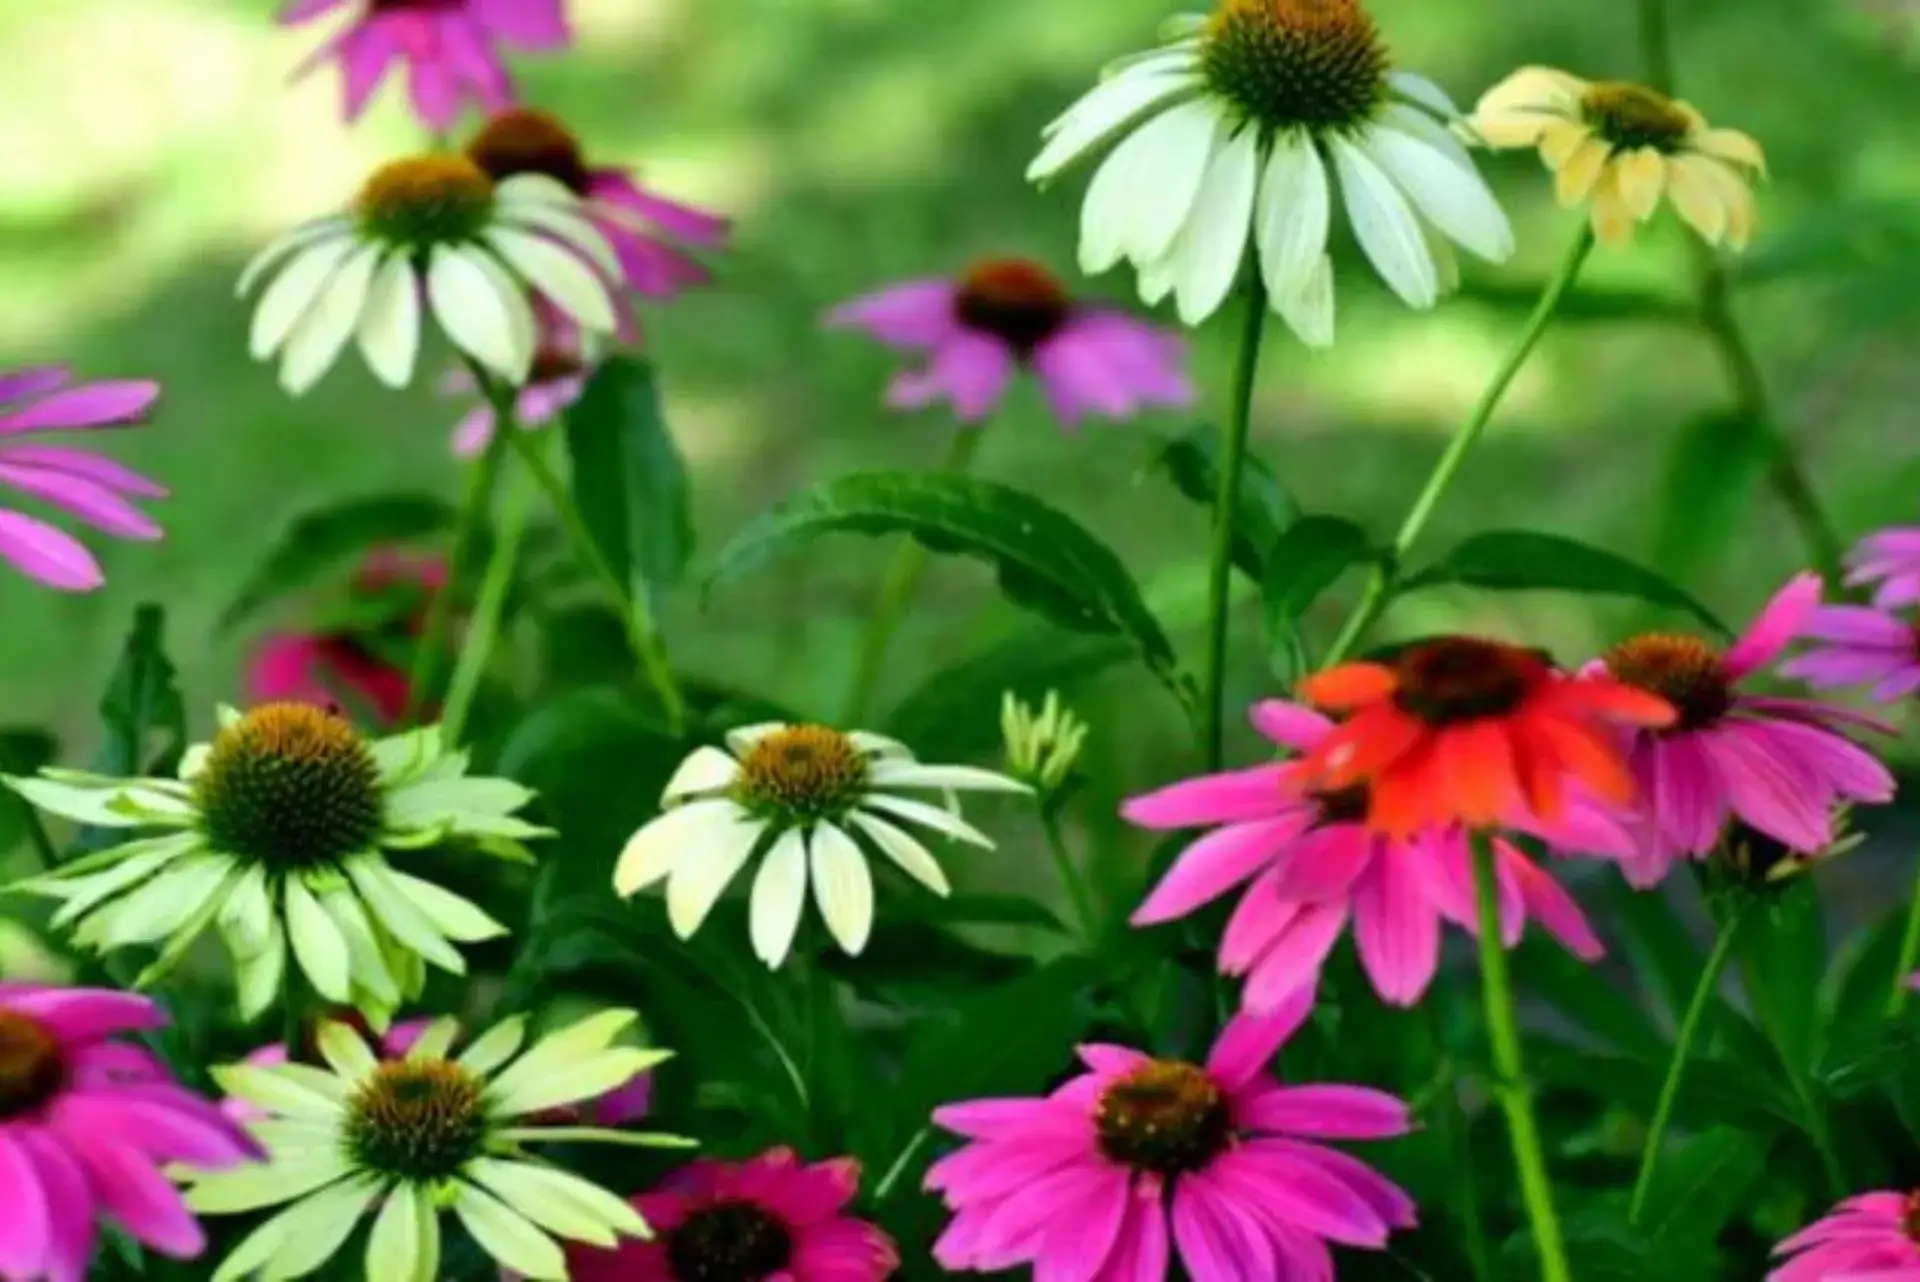 A close-up of Echinacea flowers, showcasing the vibrant purple petals, symbolizing the natural beauty and potential health benefits of Echinacea